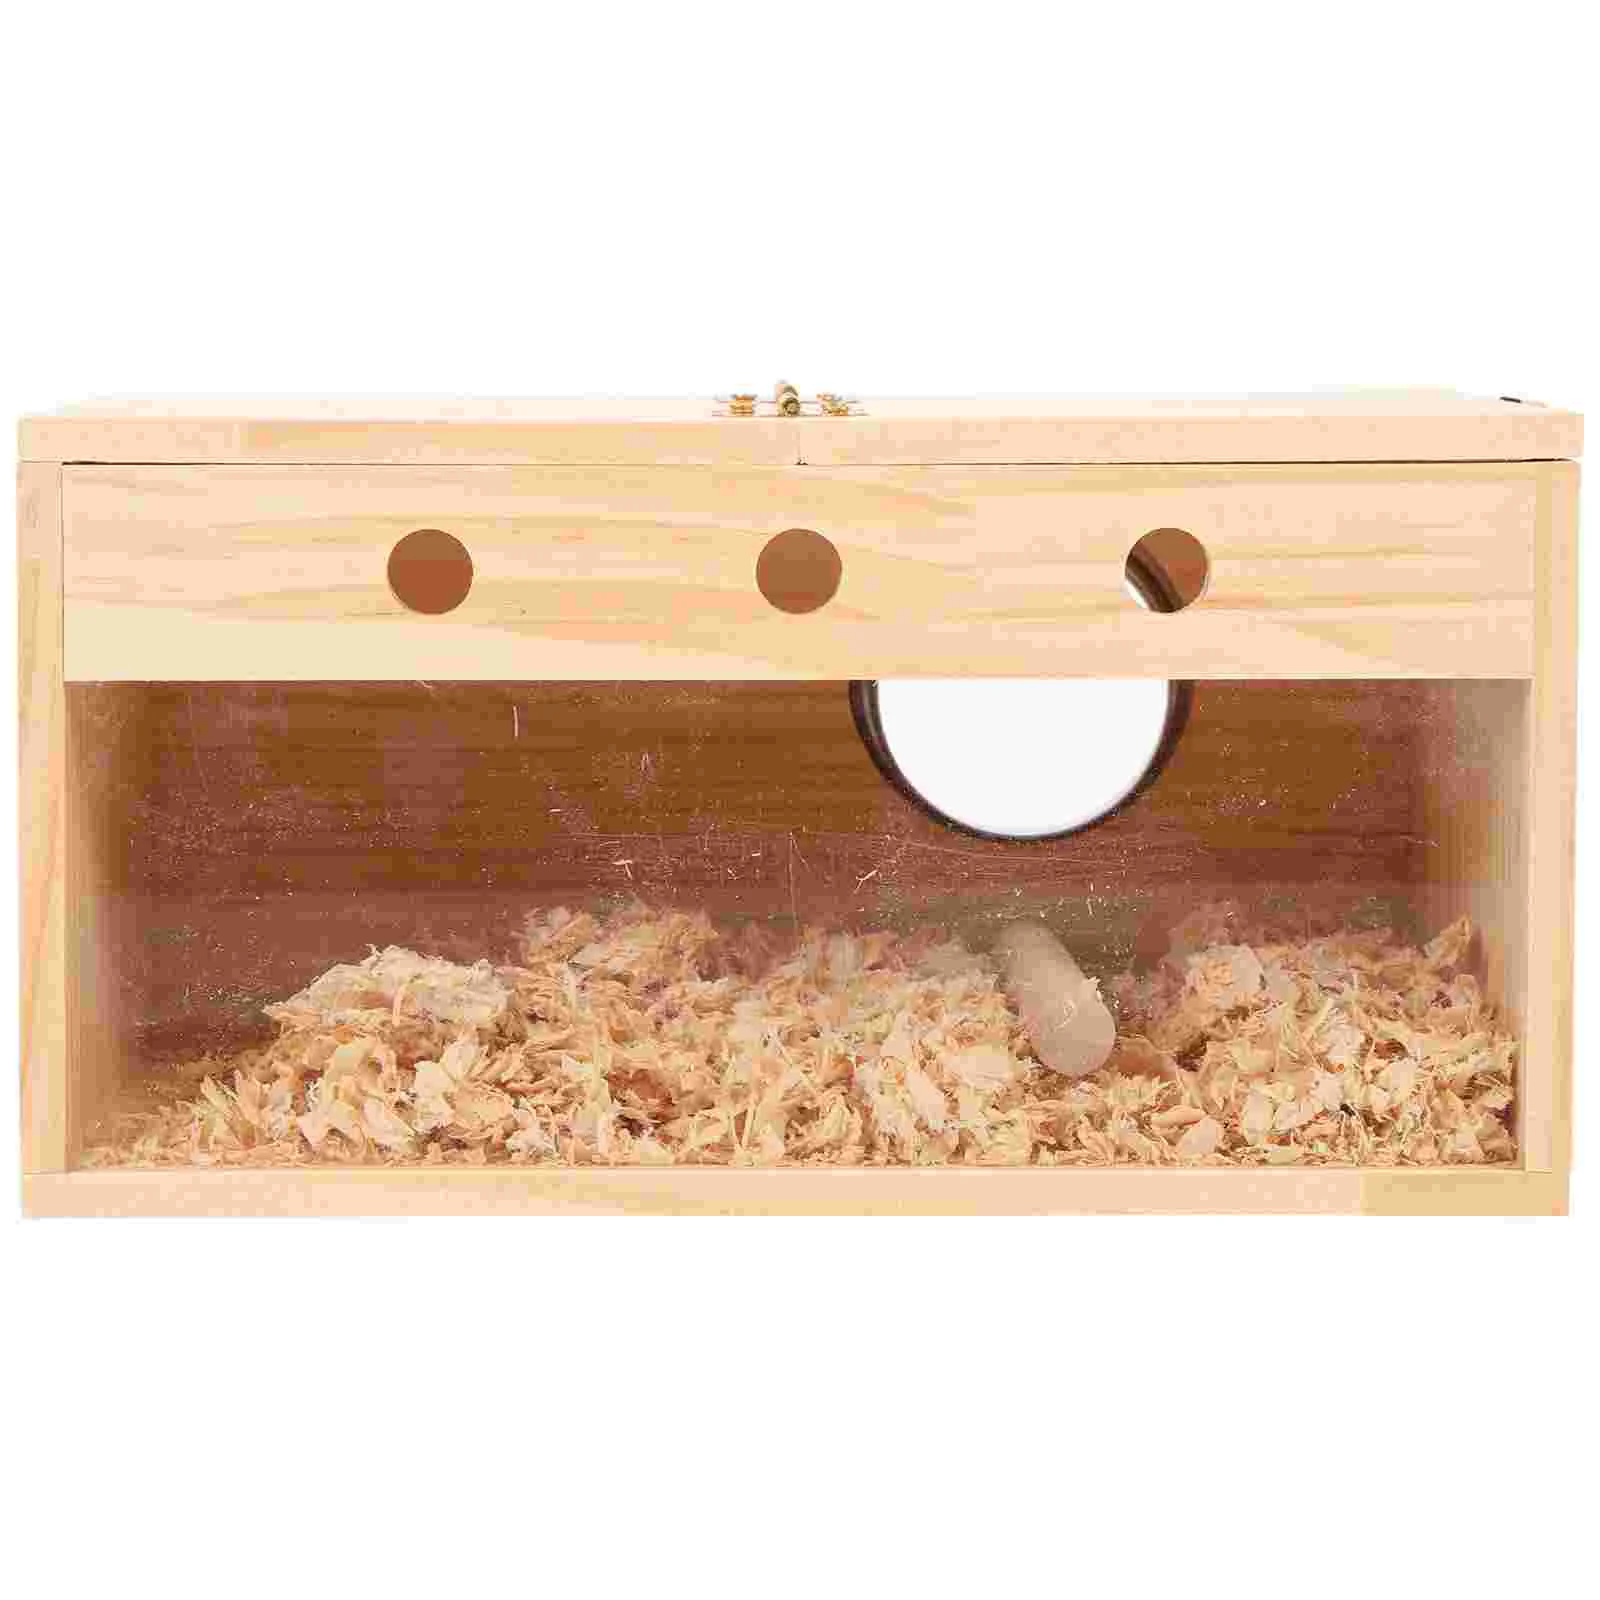 

Bird Box Nesting Parakeet Cage House Houses Cockatiel Wooden Parrot Budgie Breeding Parakeets Wood Cages Boxes Home Supplies